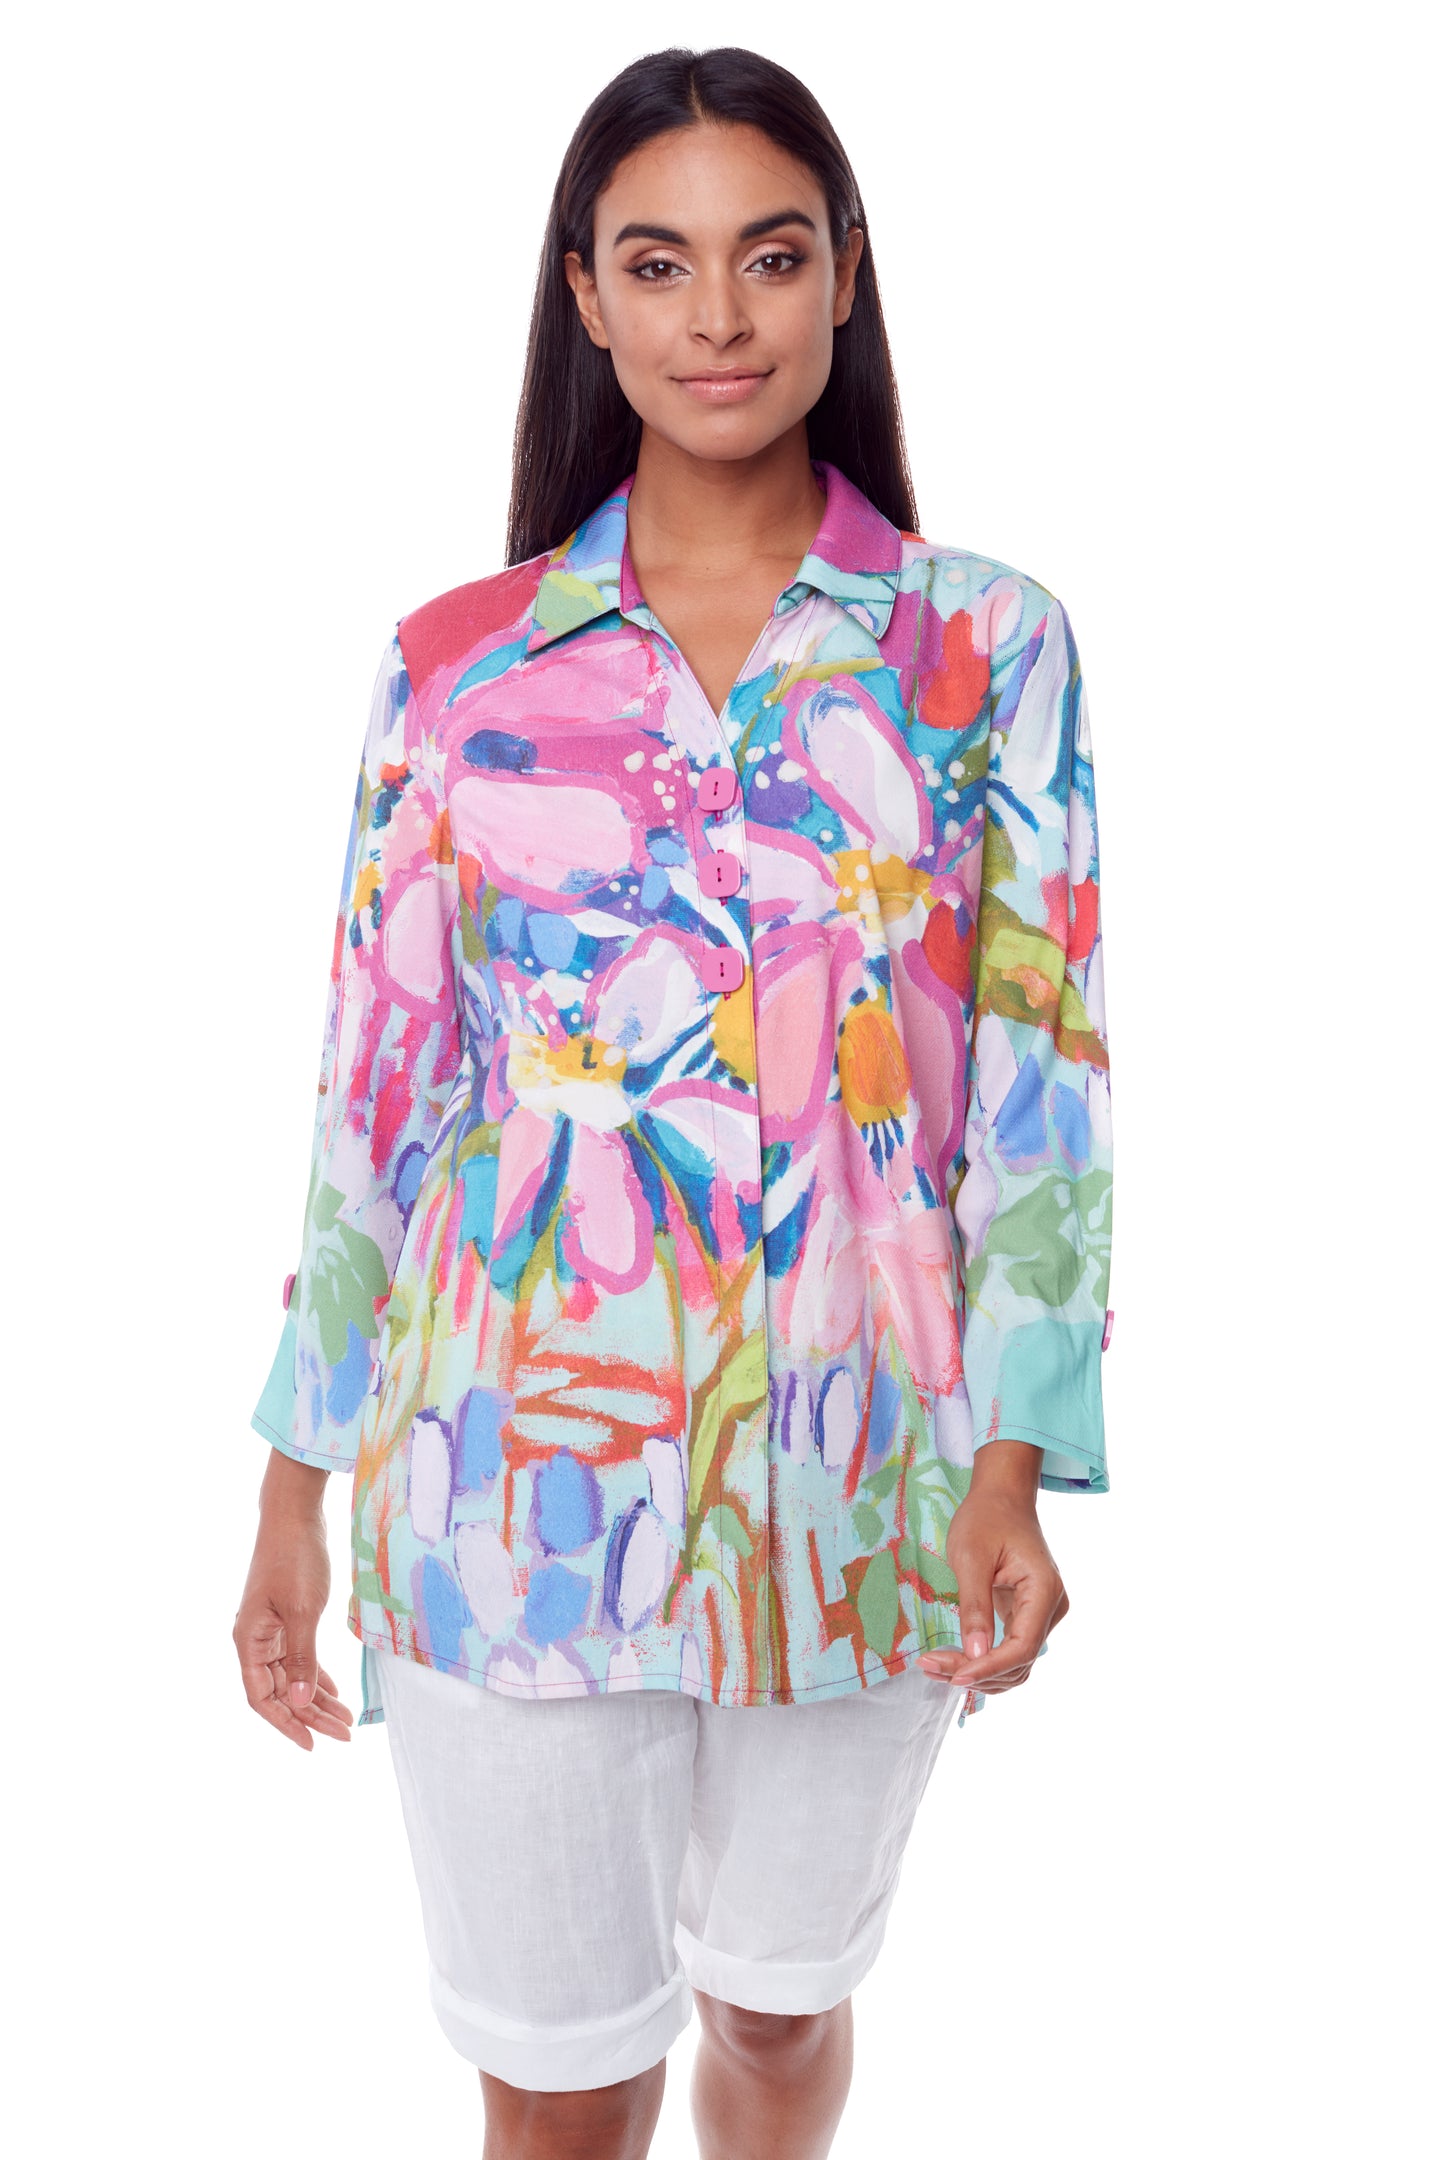 Down by the Ponds Edge 3/4-length dolman sleeve blouse